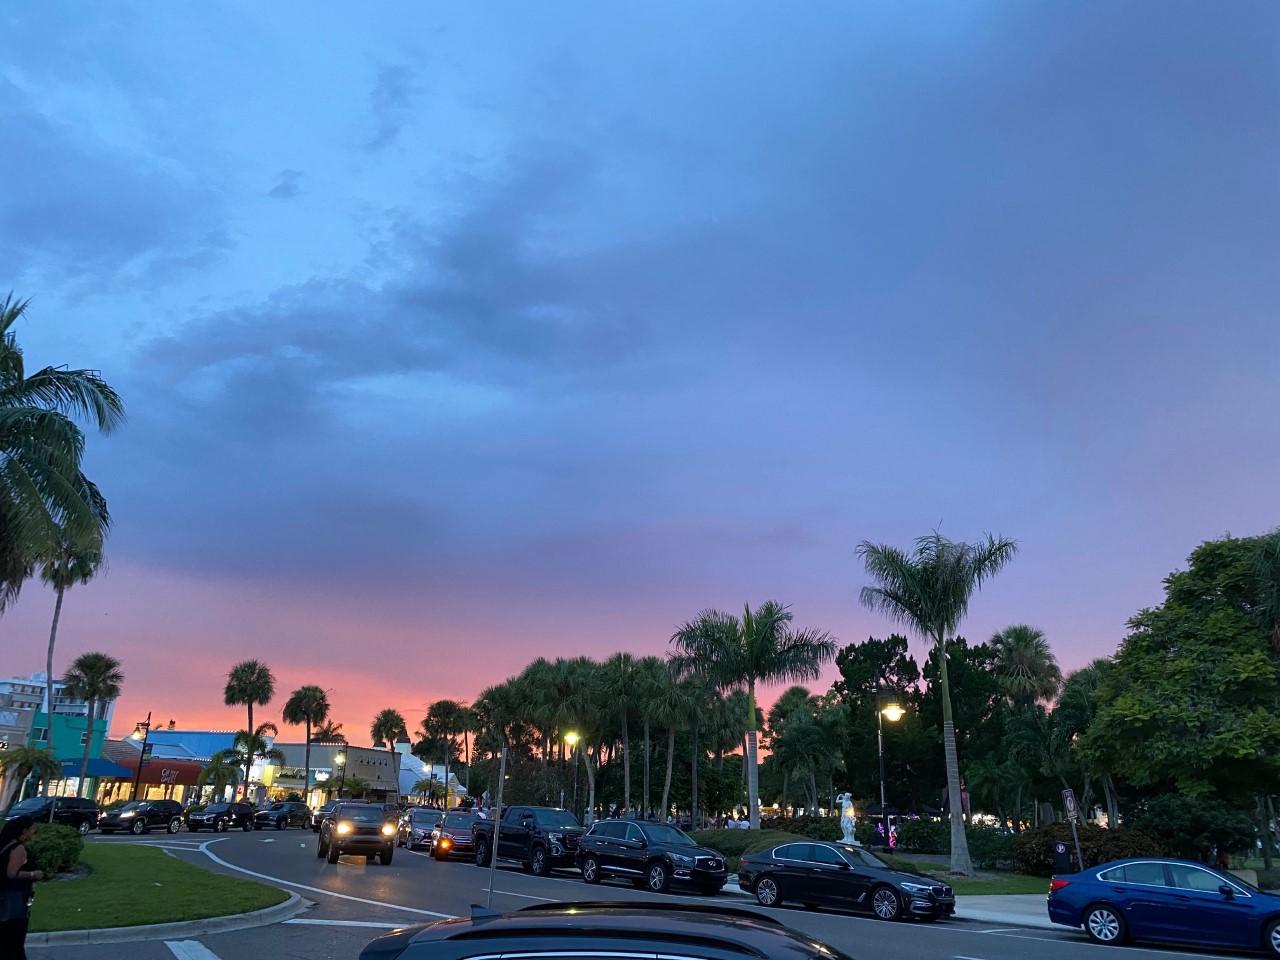 St. Armands Circle after a rain shower with a pink-orange sky at sunset.